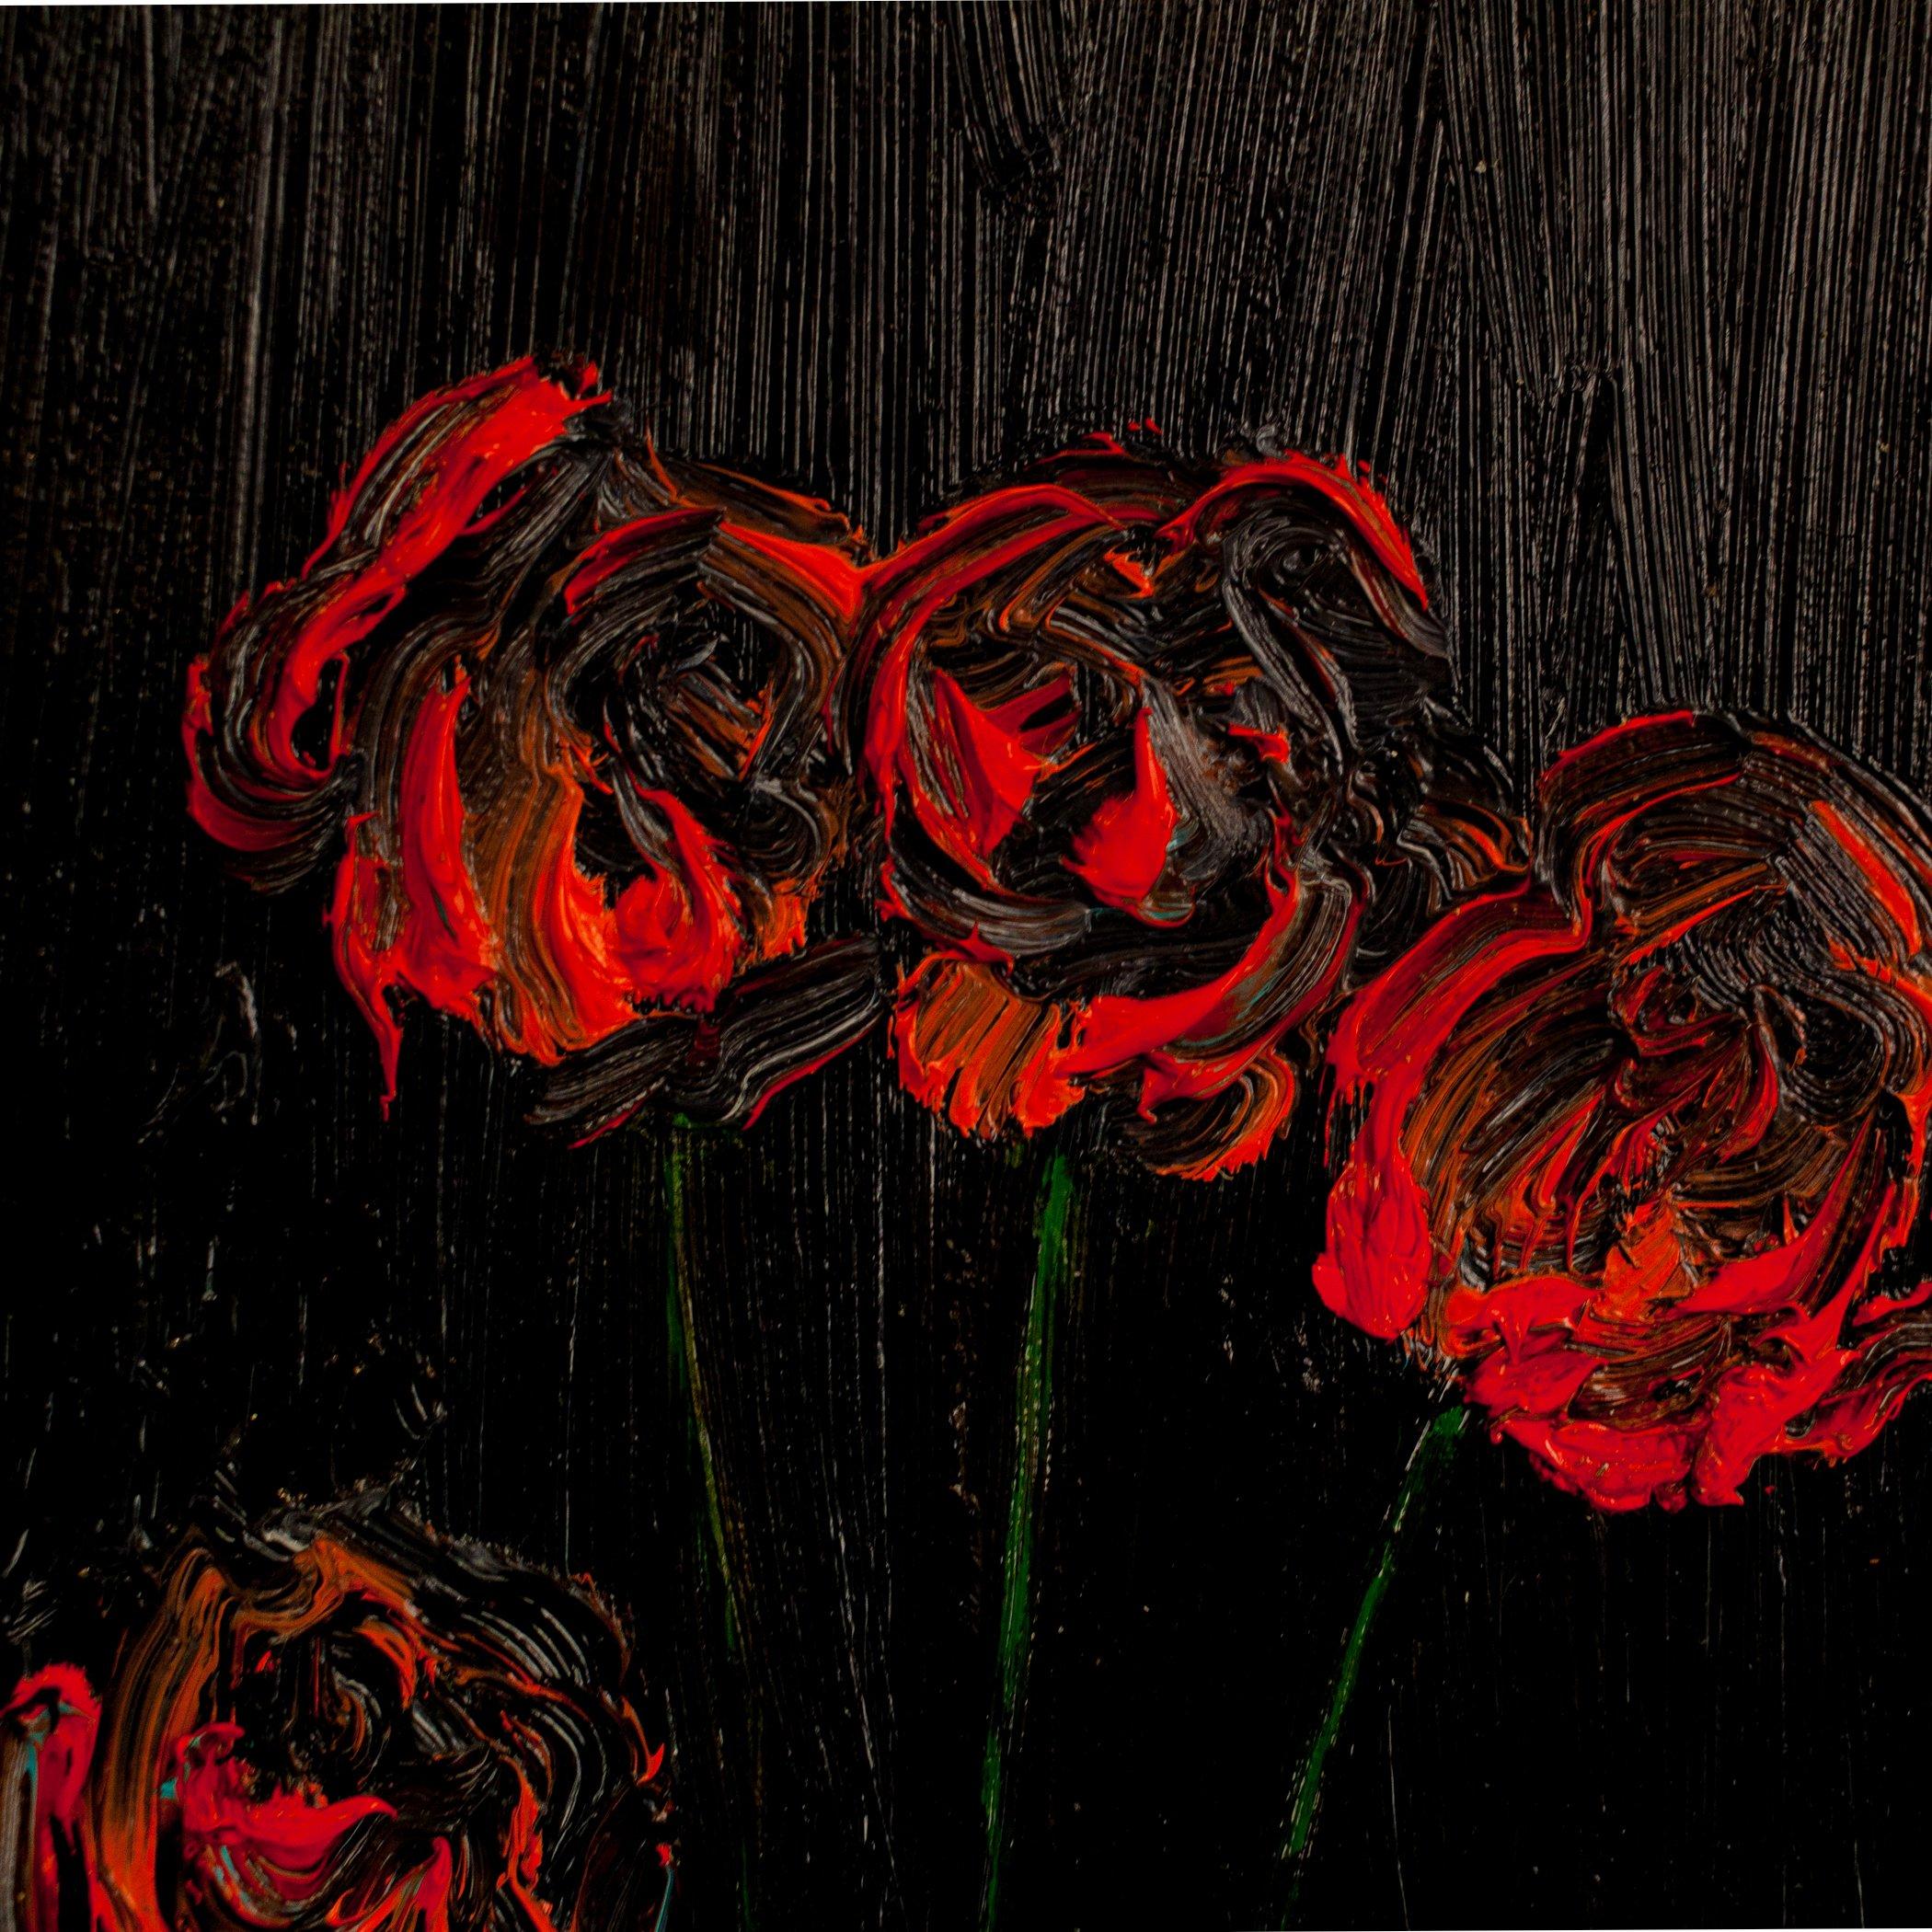 Red Roses In The Dark - Neo-Expressionist Painting by Mariam Lomidze